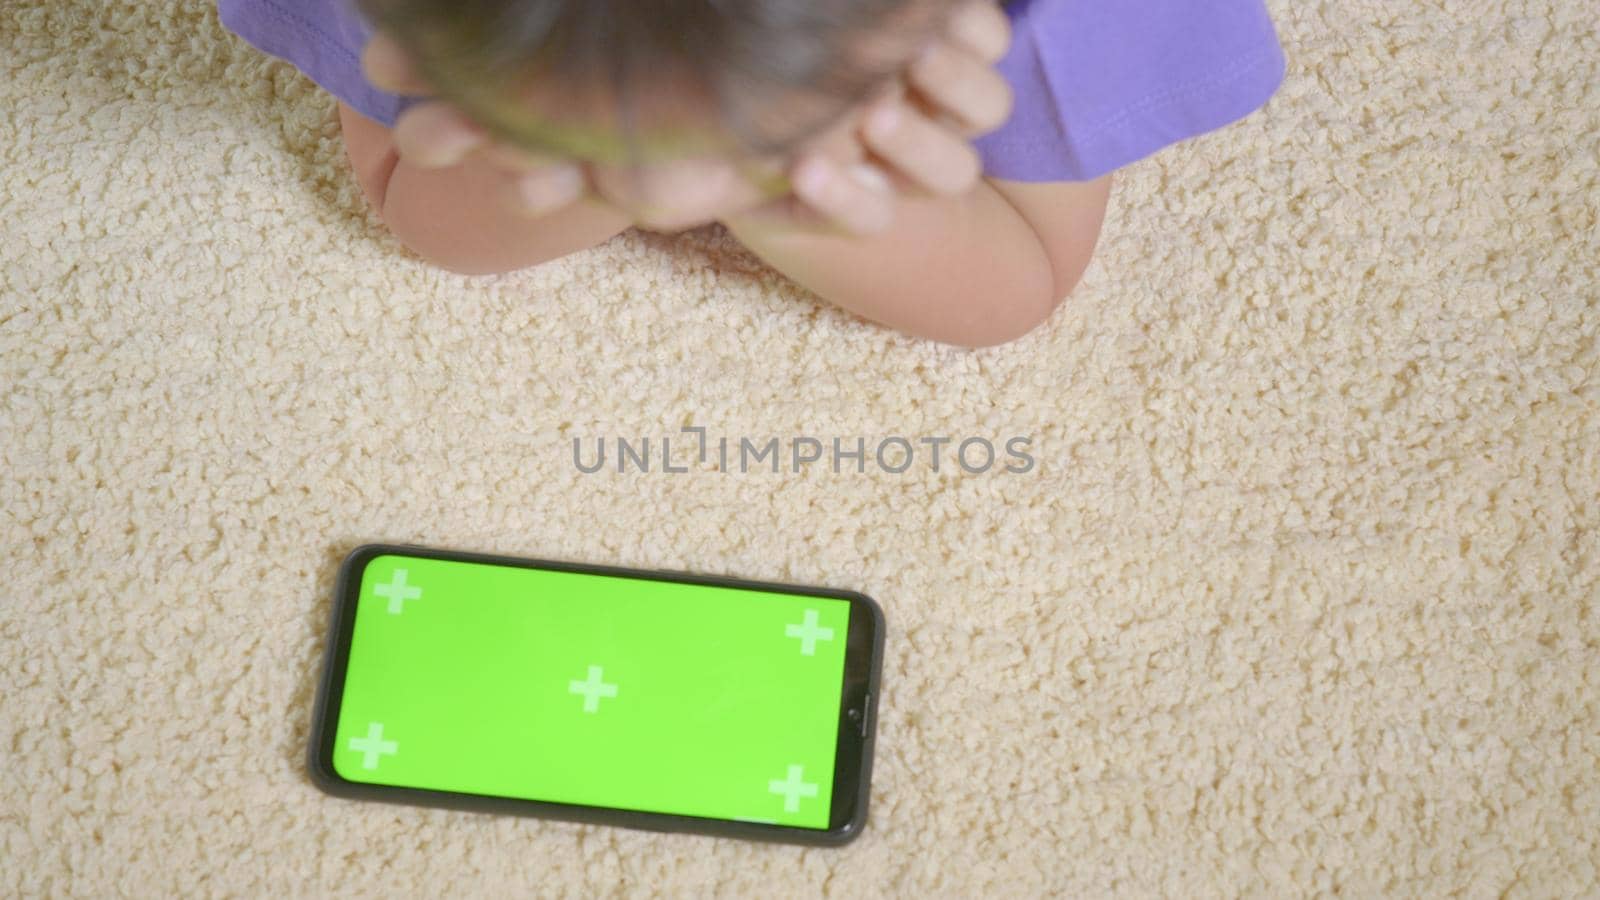 Asian kid boy preschool with gadget playing video games digital on mobile phone at home. Little child using and holding a smartphone green screen in hand, Technology generation concept